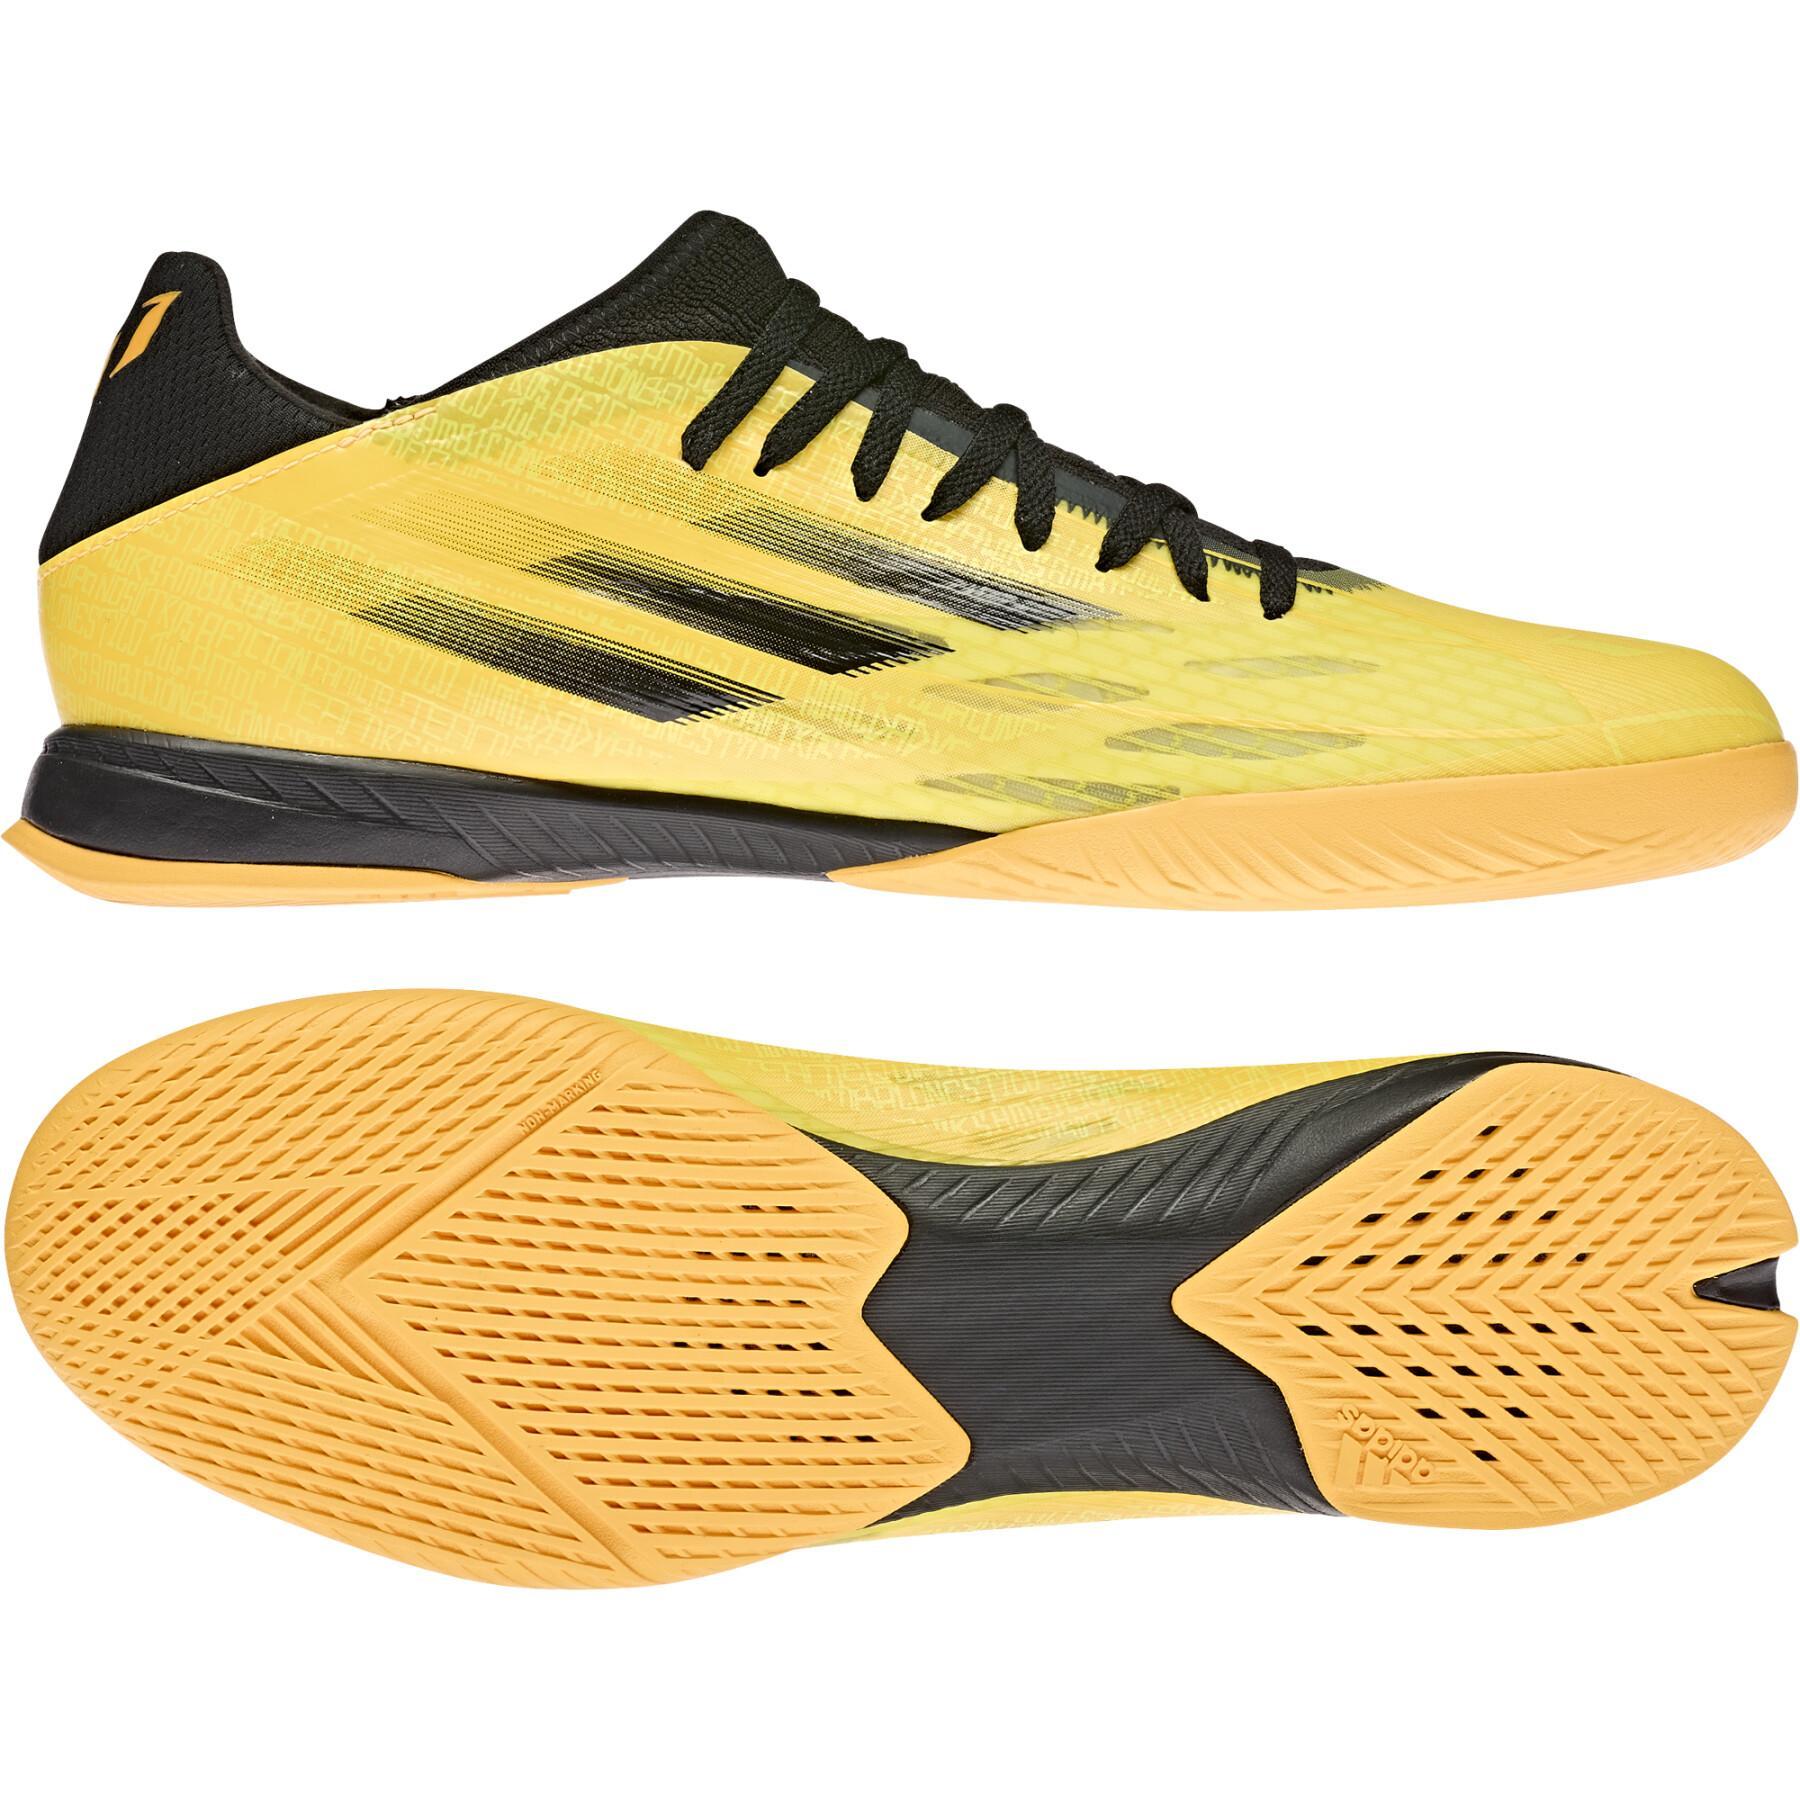 Soccer shoes adidas X Speedflow Messi.3 IN